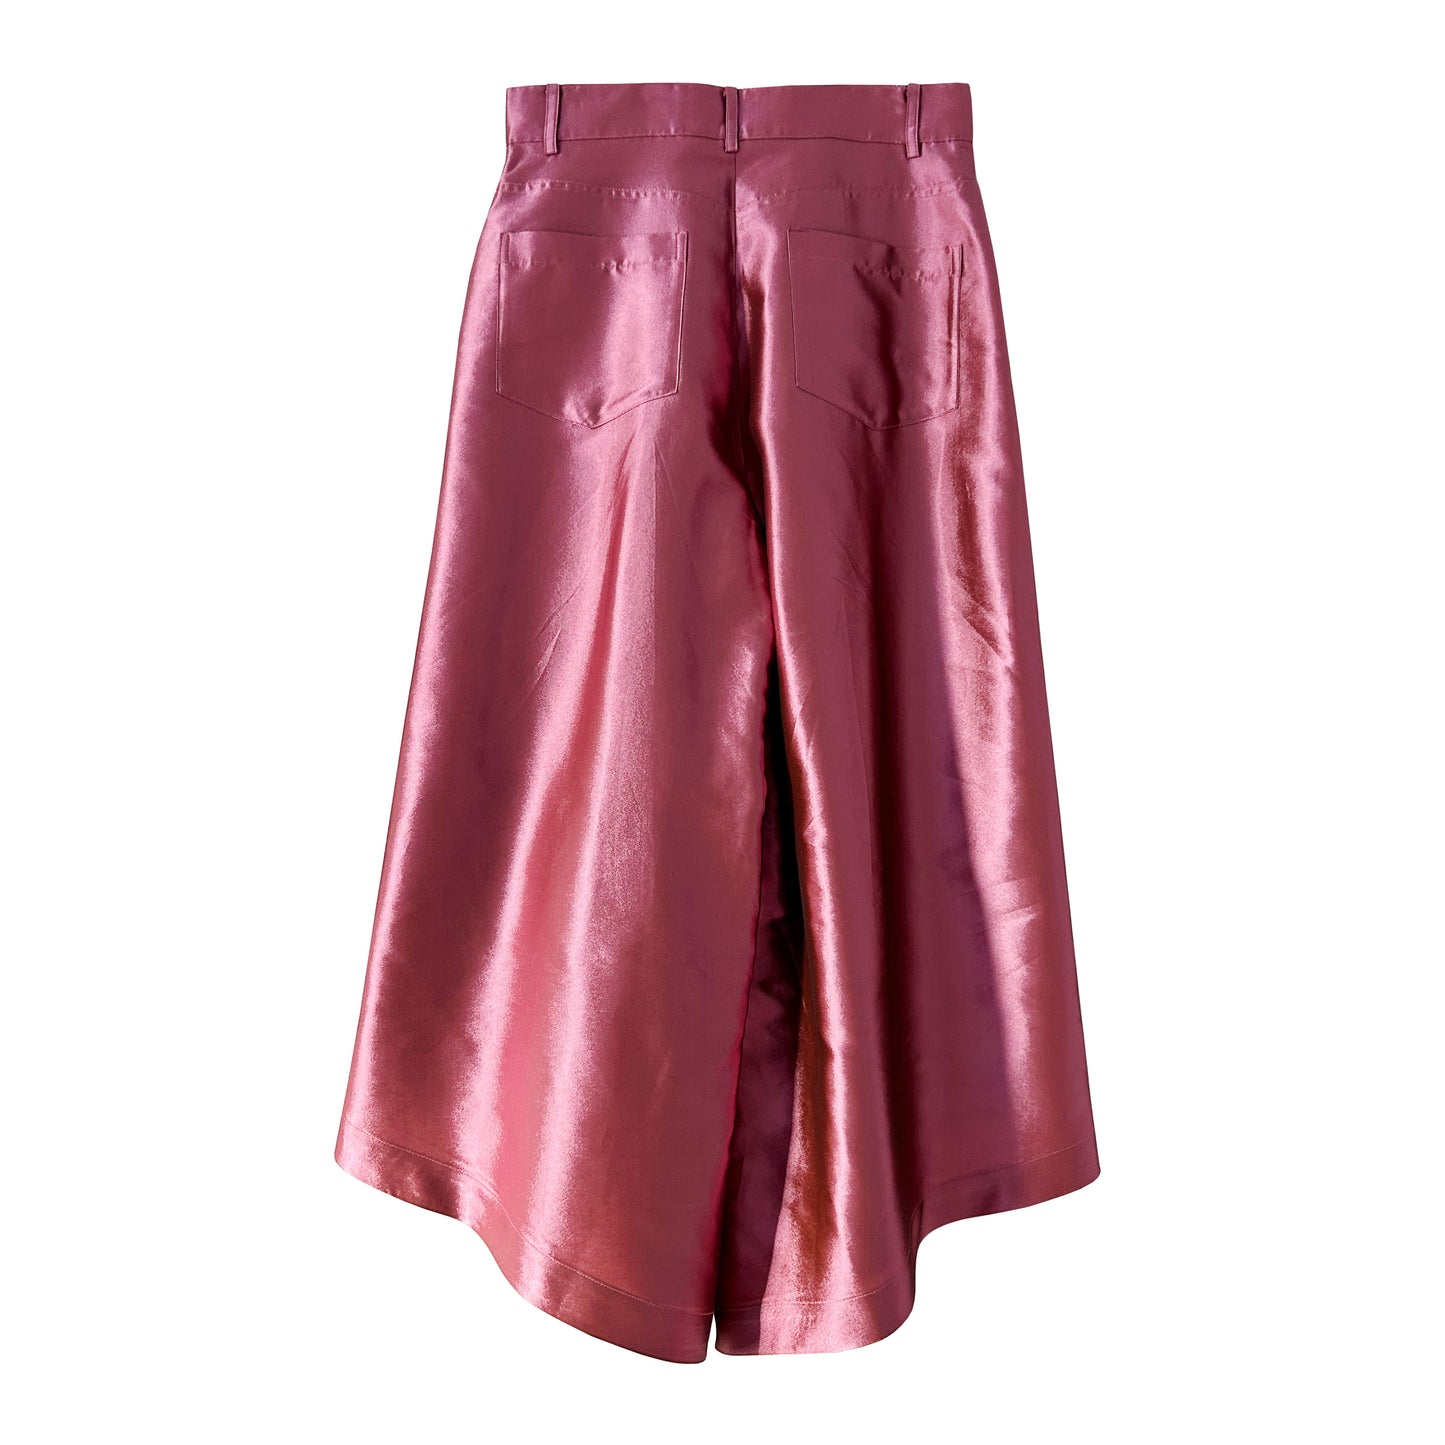 Wide Flare High Waisted Pants in Metallic Pink Satin